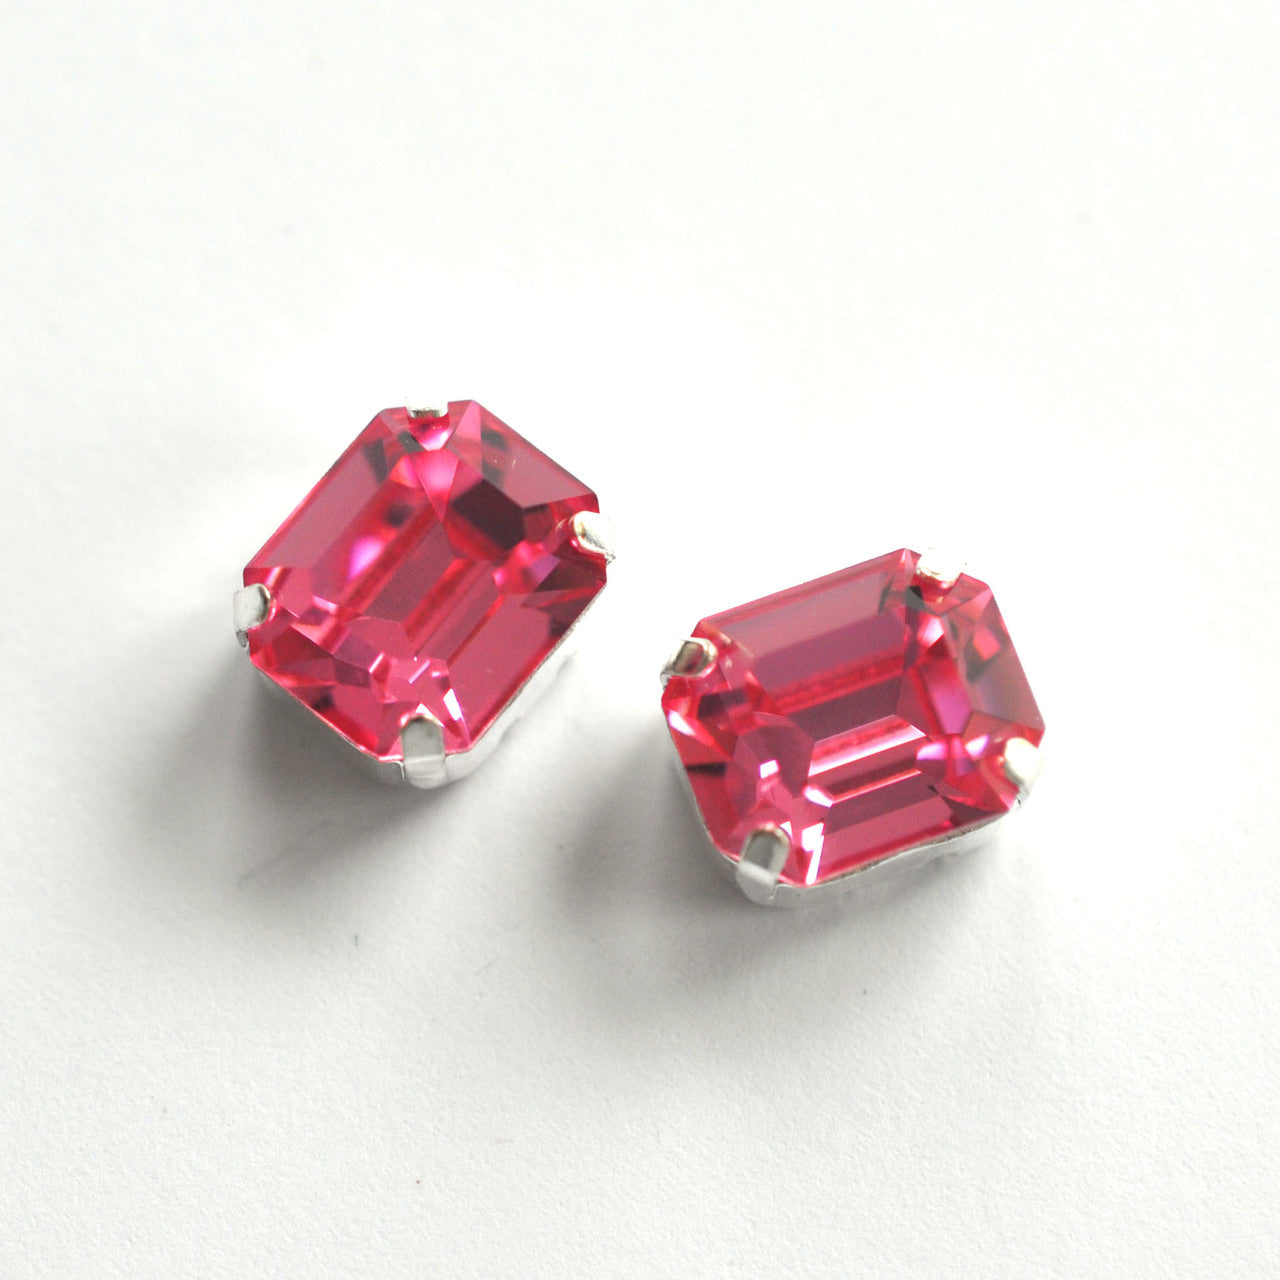 Rose 12x10mm Octagon Sew On Crystals - 2 Pieces